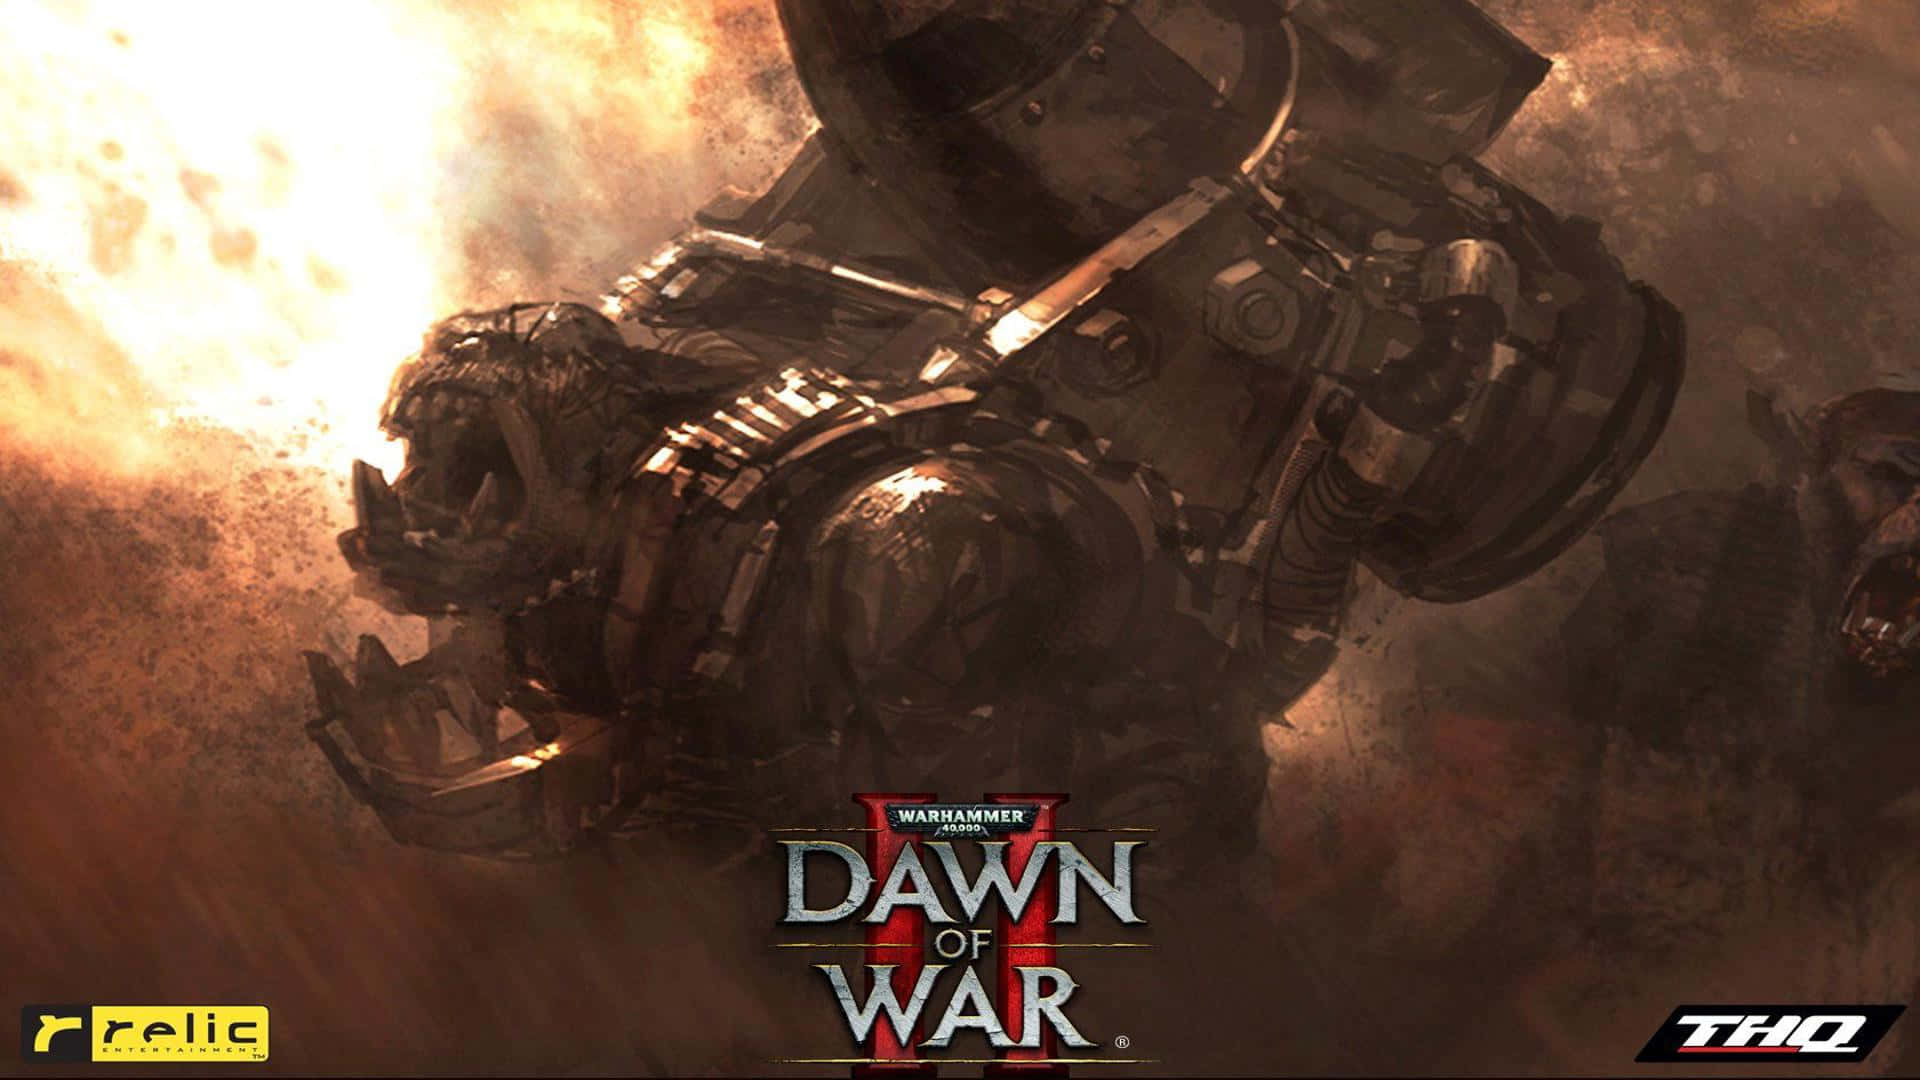 Face the imminent war with HD Dawn of War III